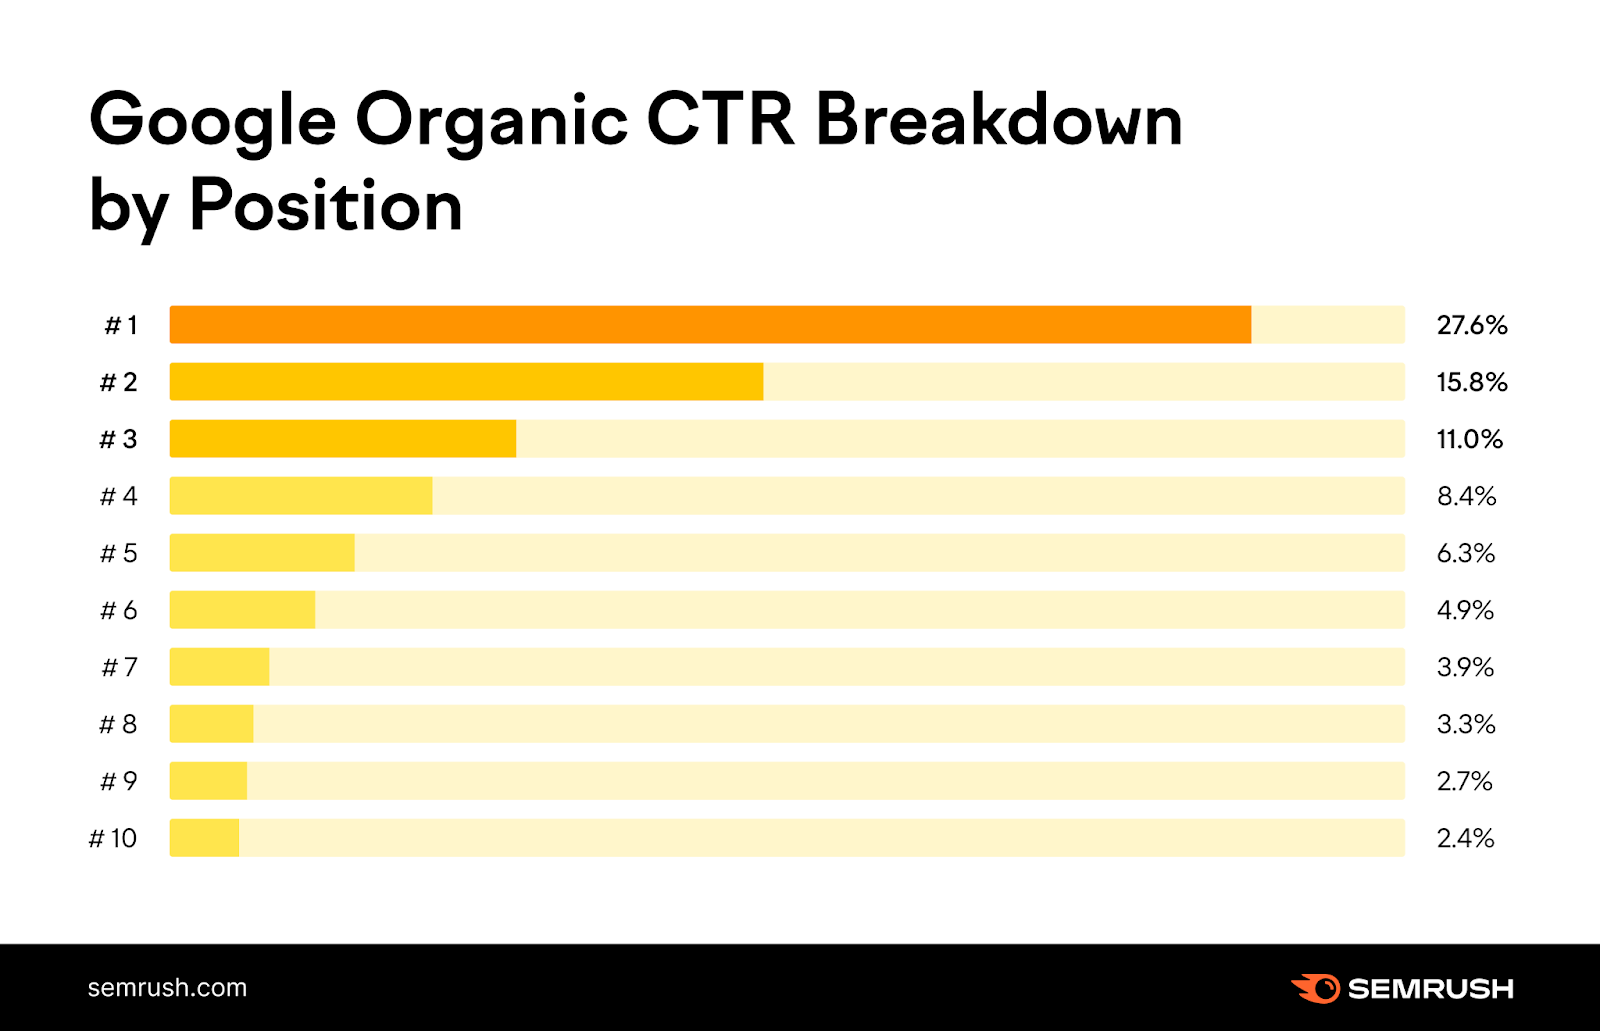 Google organic CTR breakdown by position shows that a listing in position one has 27.6% CTR, position two has 15.8%, and position three has 11%